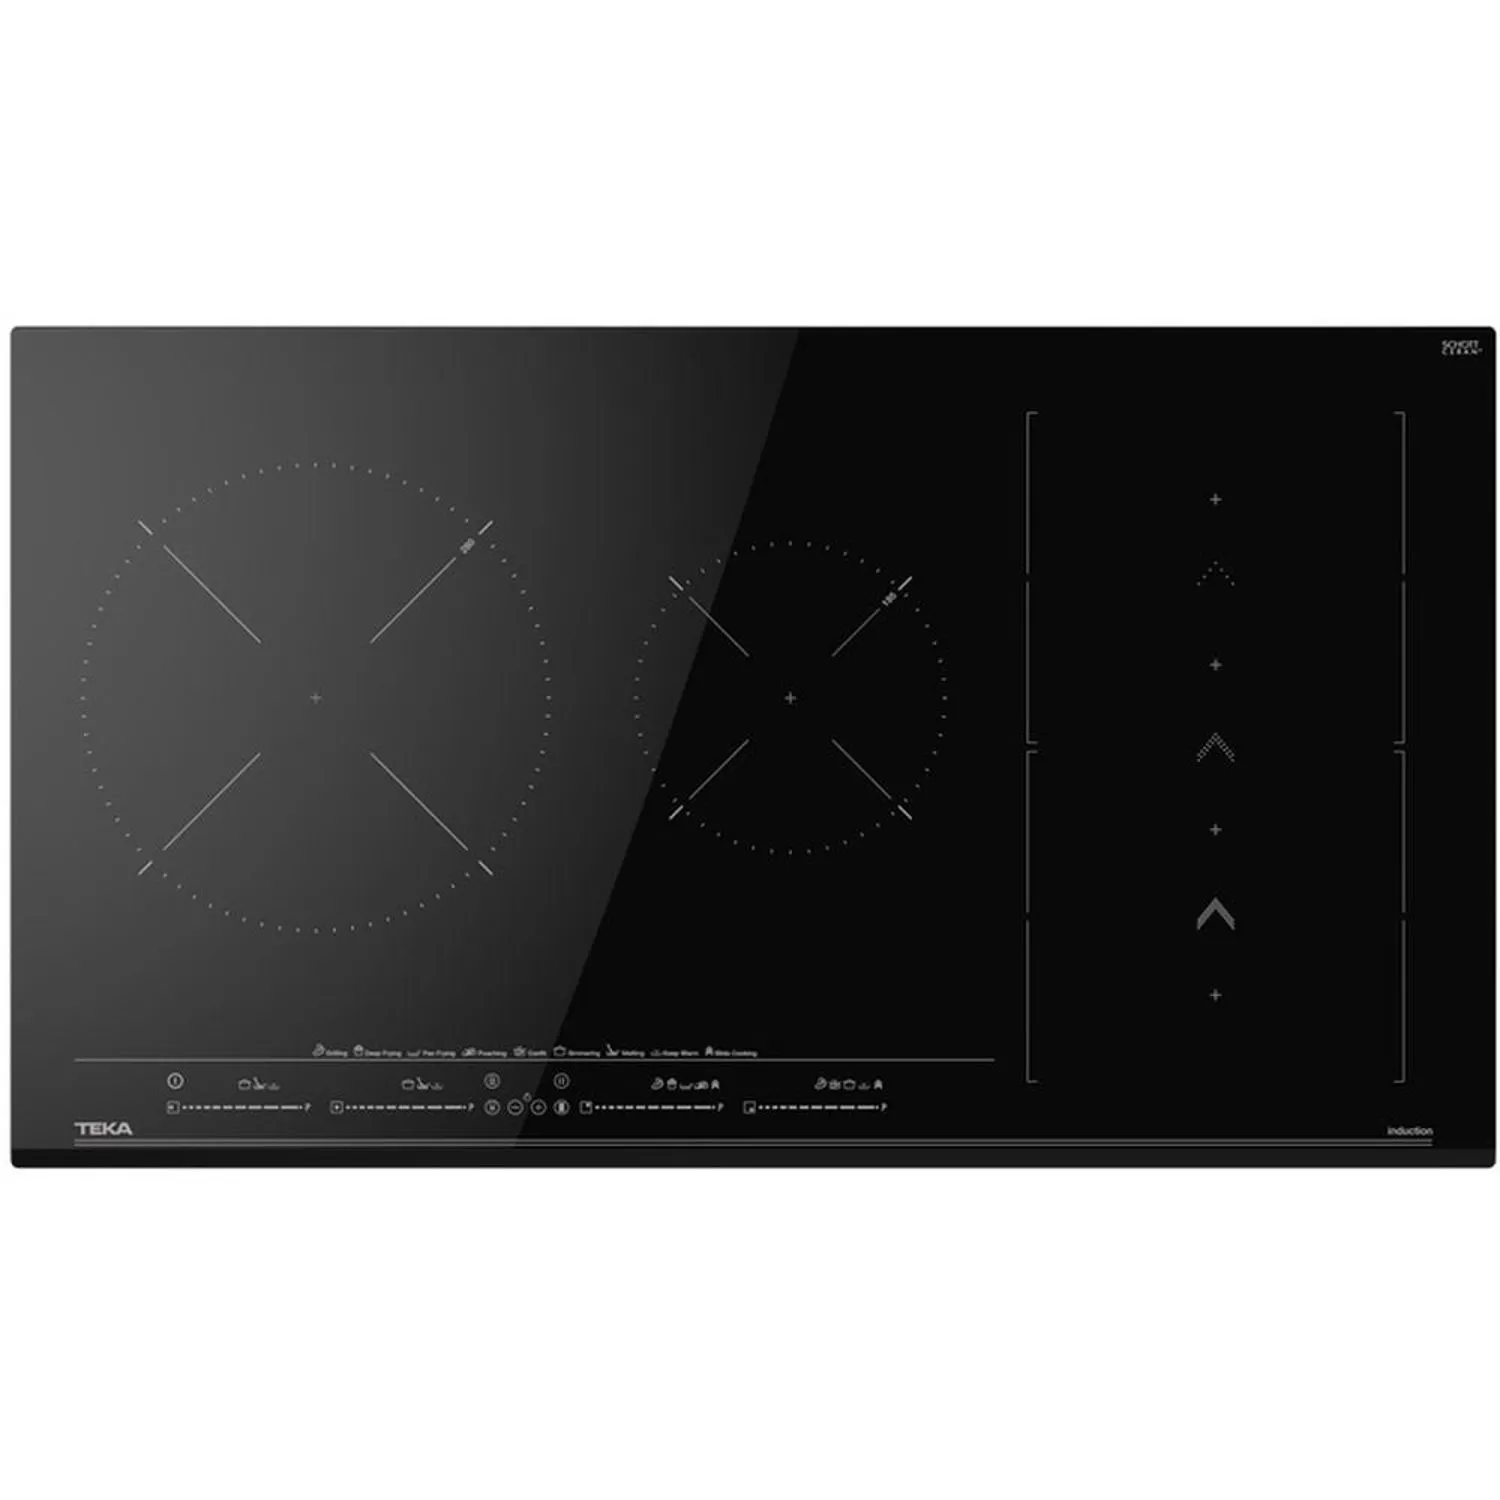 Teka 7200W Induction Flex Hob with Slide Cooking function and 4 cooking zones Black Model IZS 96700 MST | 1 Year Warranty